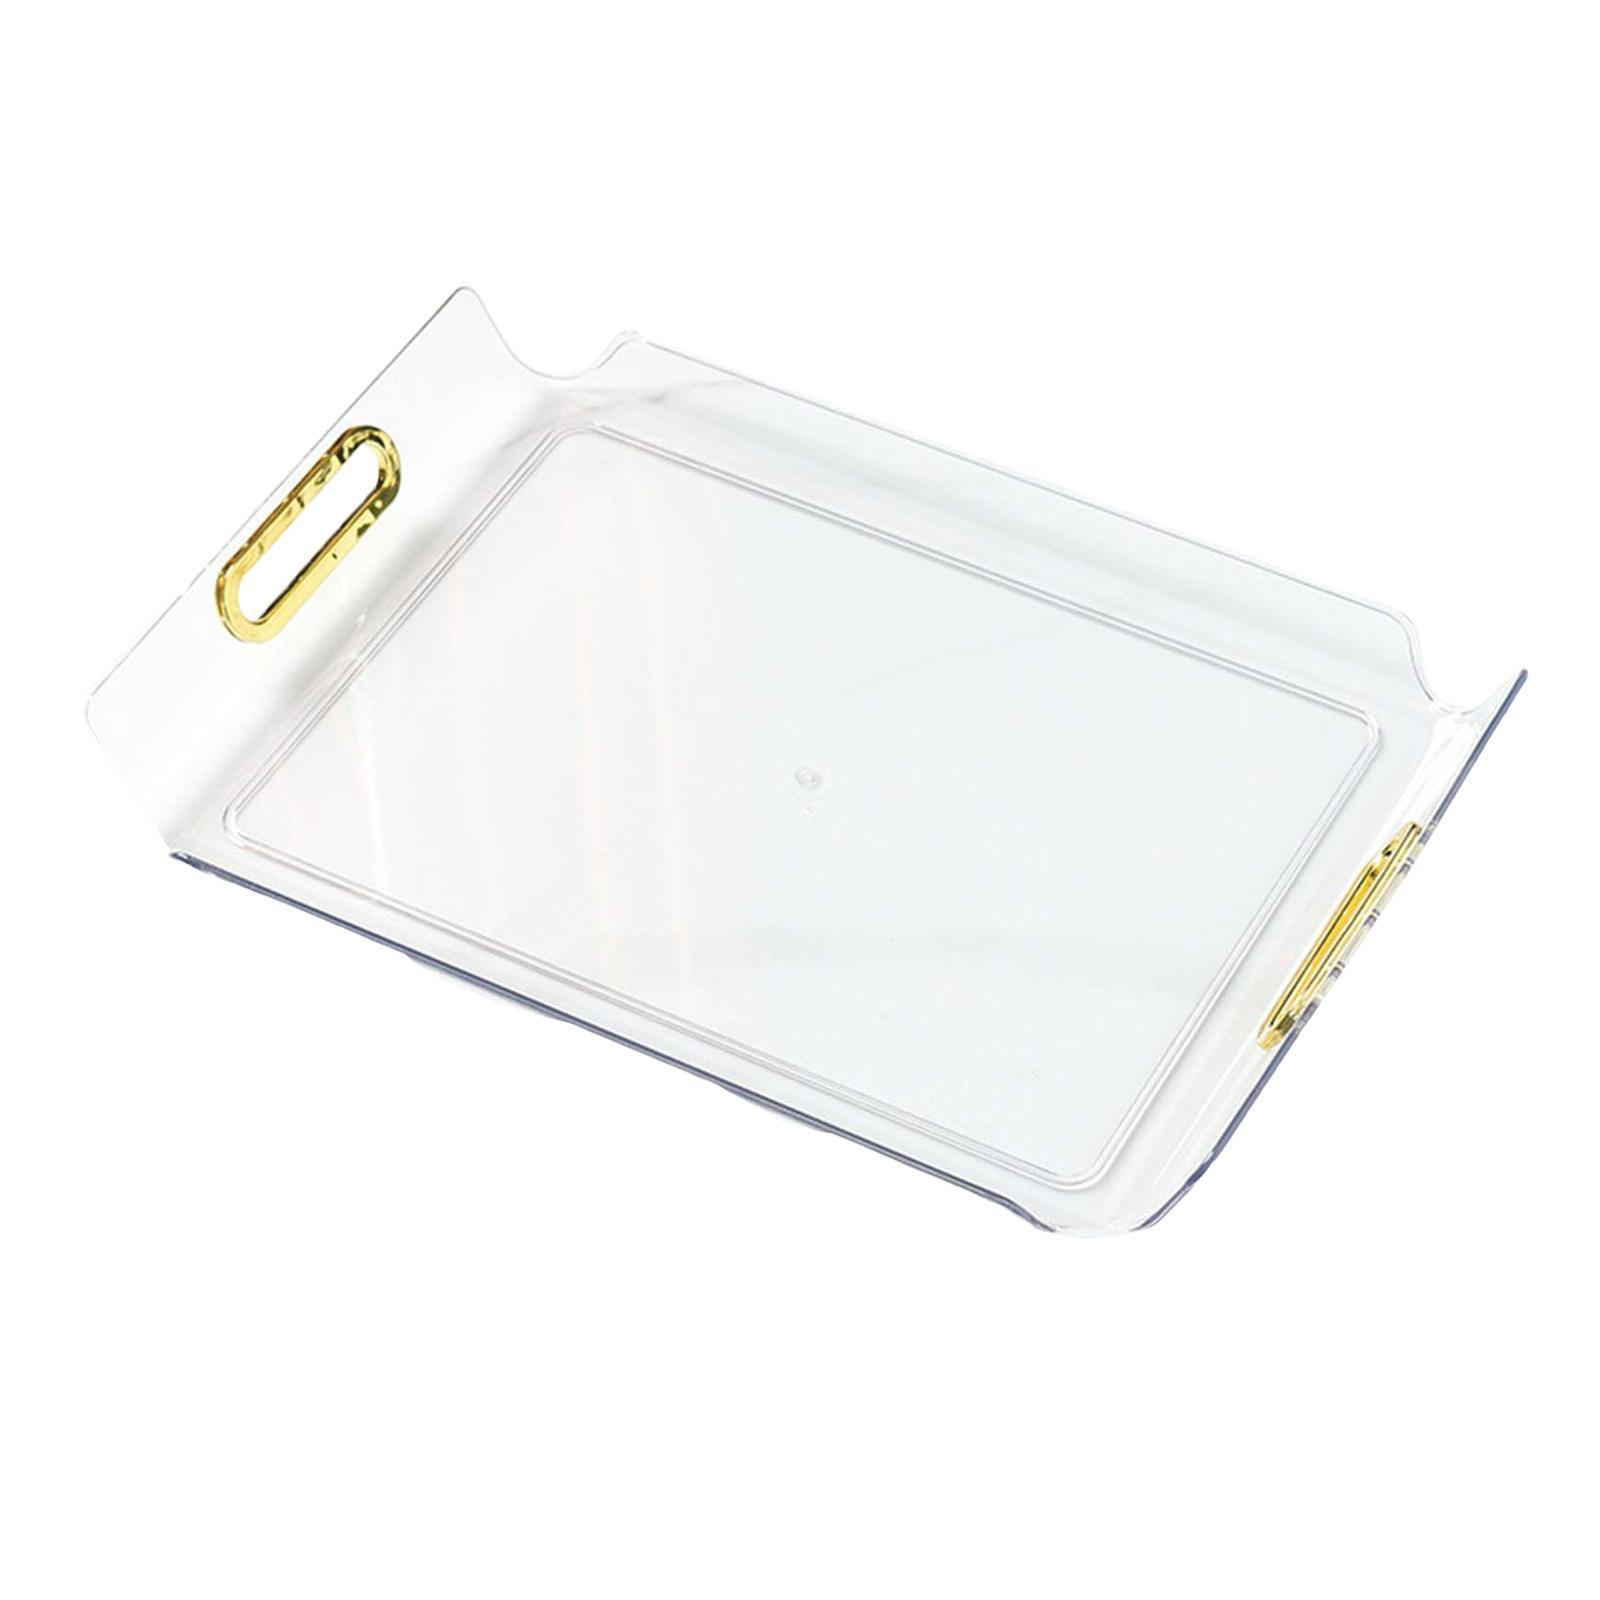 Portable Vanity Tray with Handle Makeup Organizer Decorative Tray for Dresser Kitchen Countertop Home Cabinet Decoration